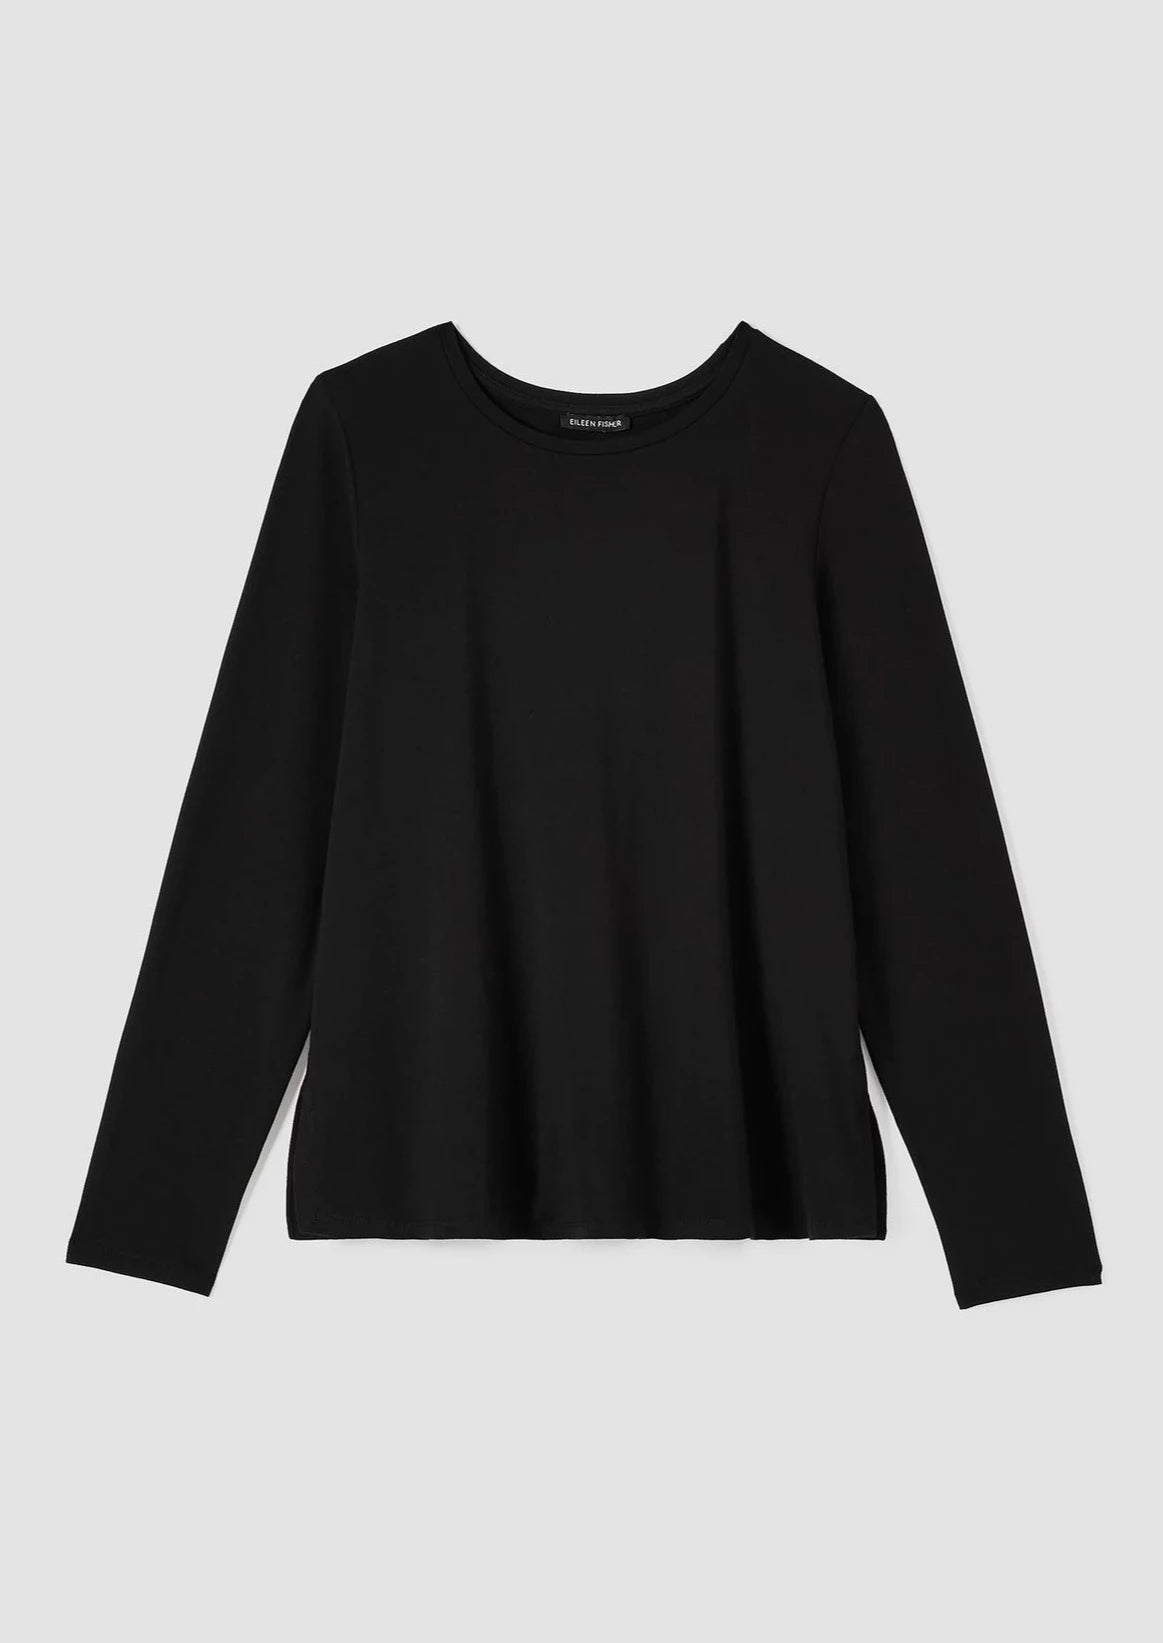 Eileen Fisher - Stretch Jersey Knit Crew Neck Top